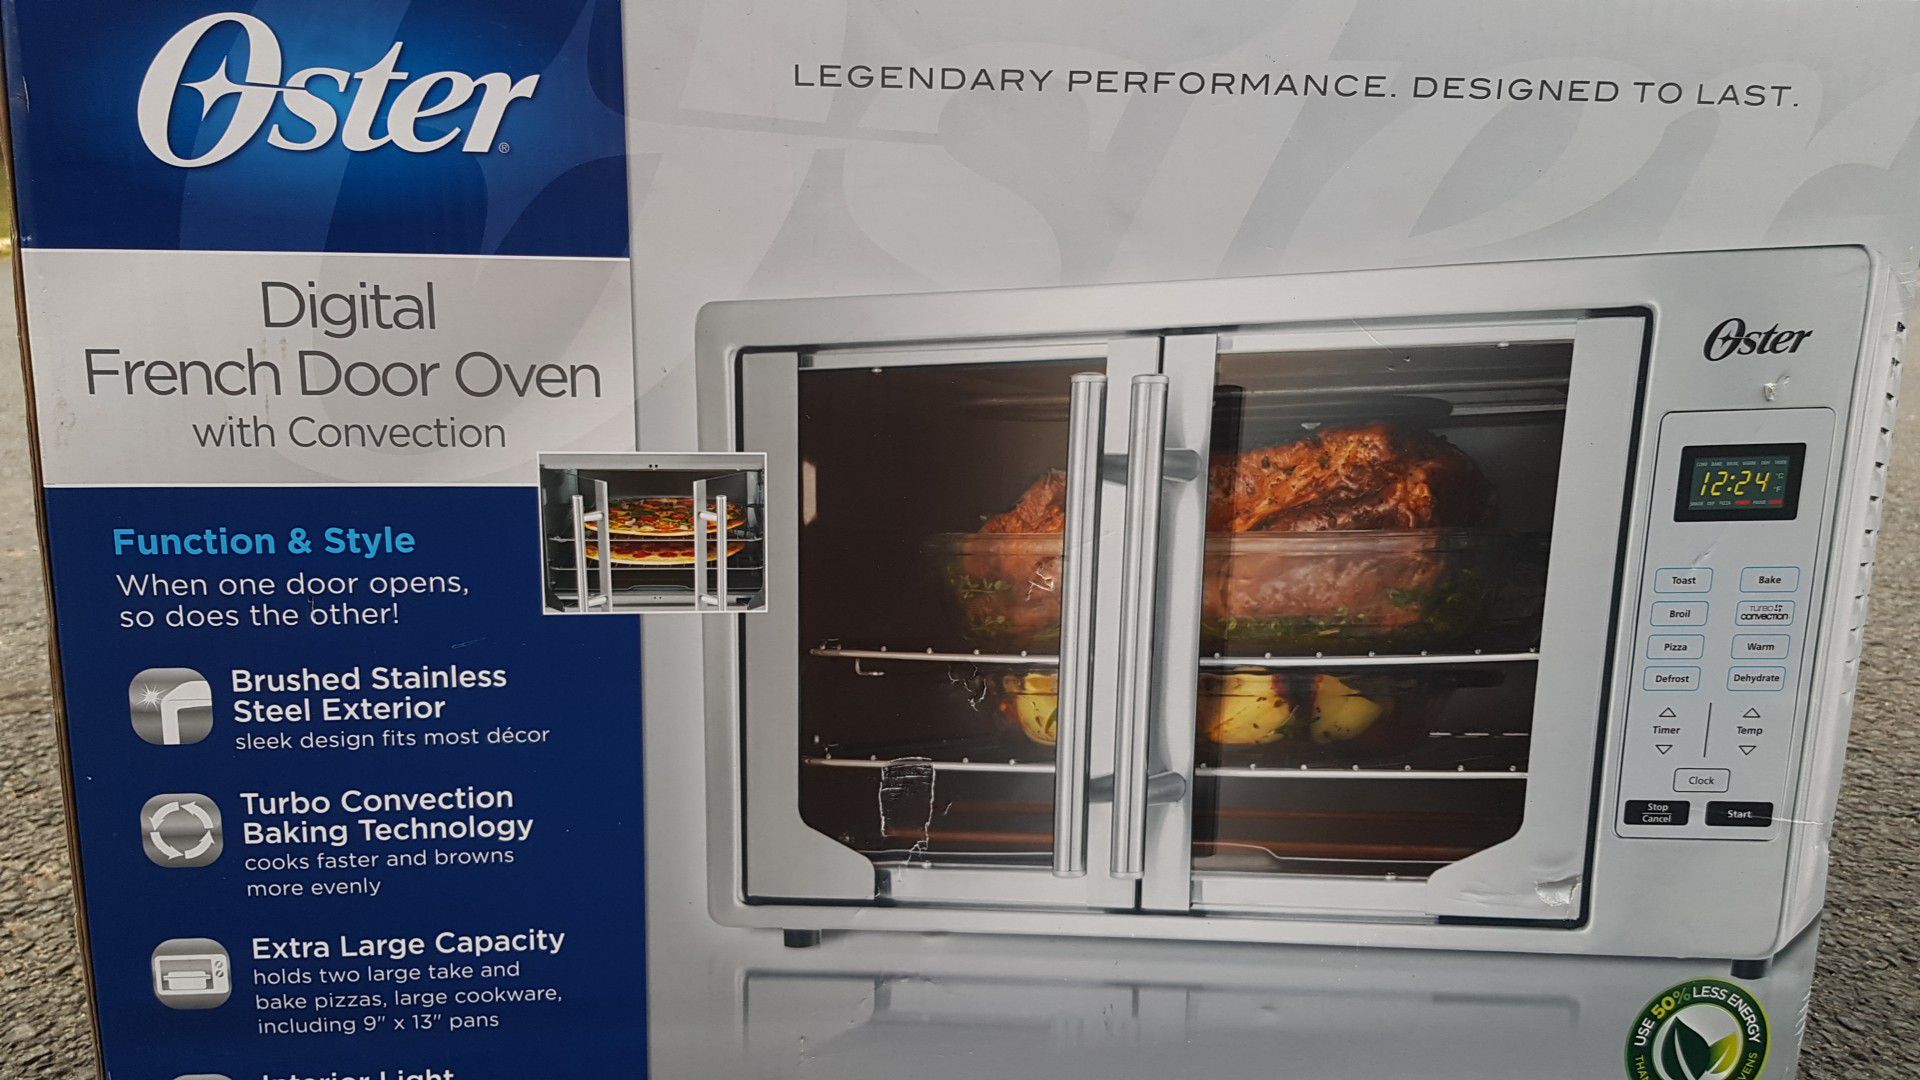 Digital French door oven with convection